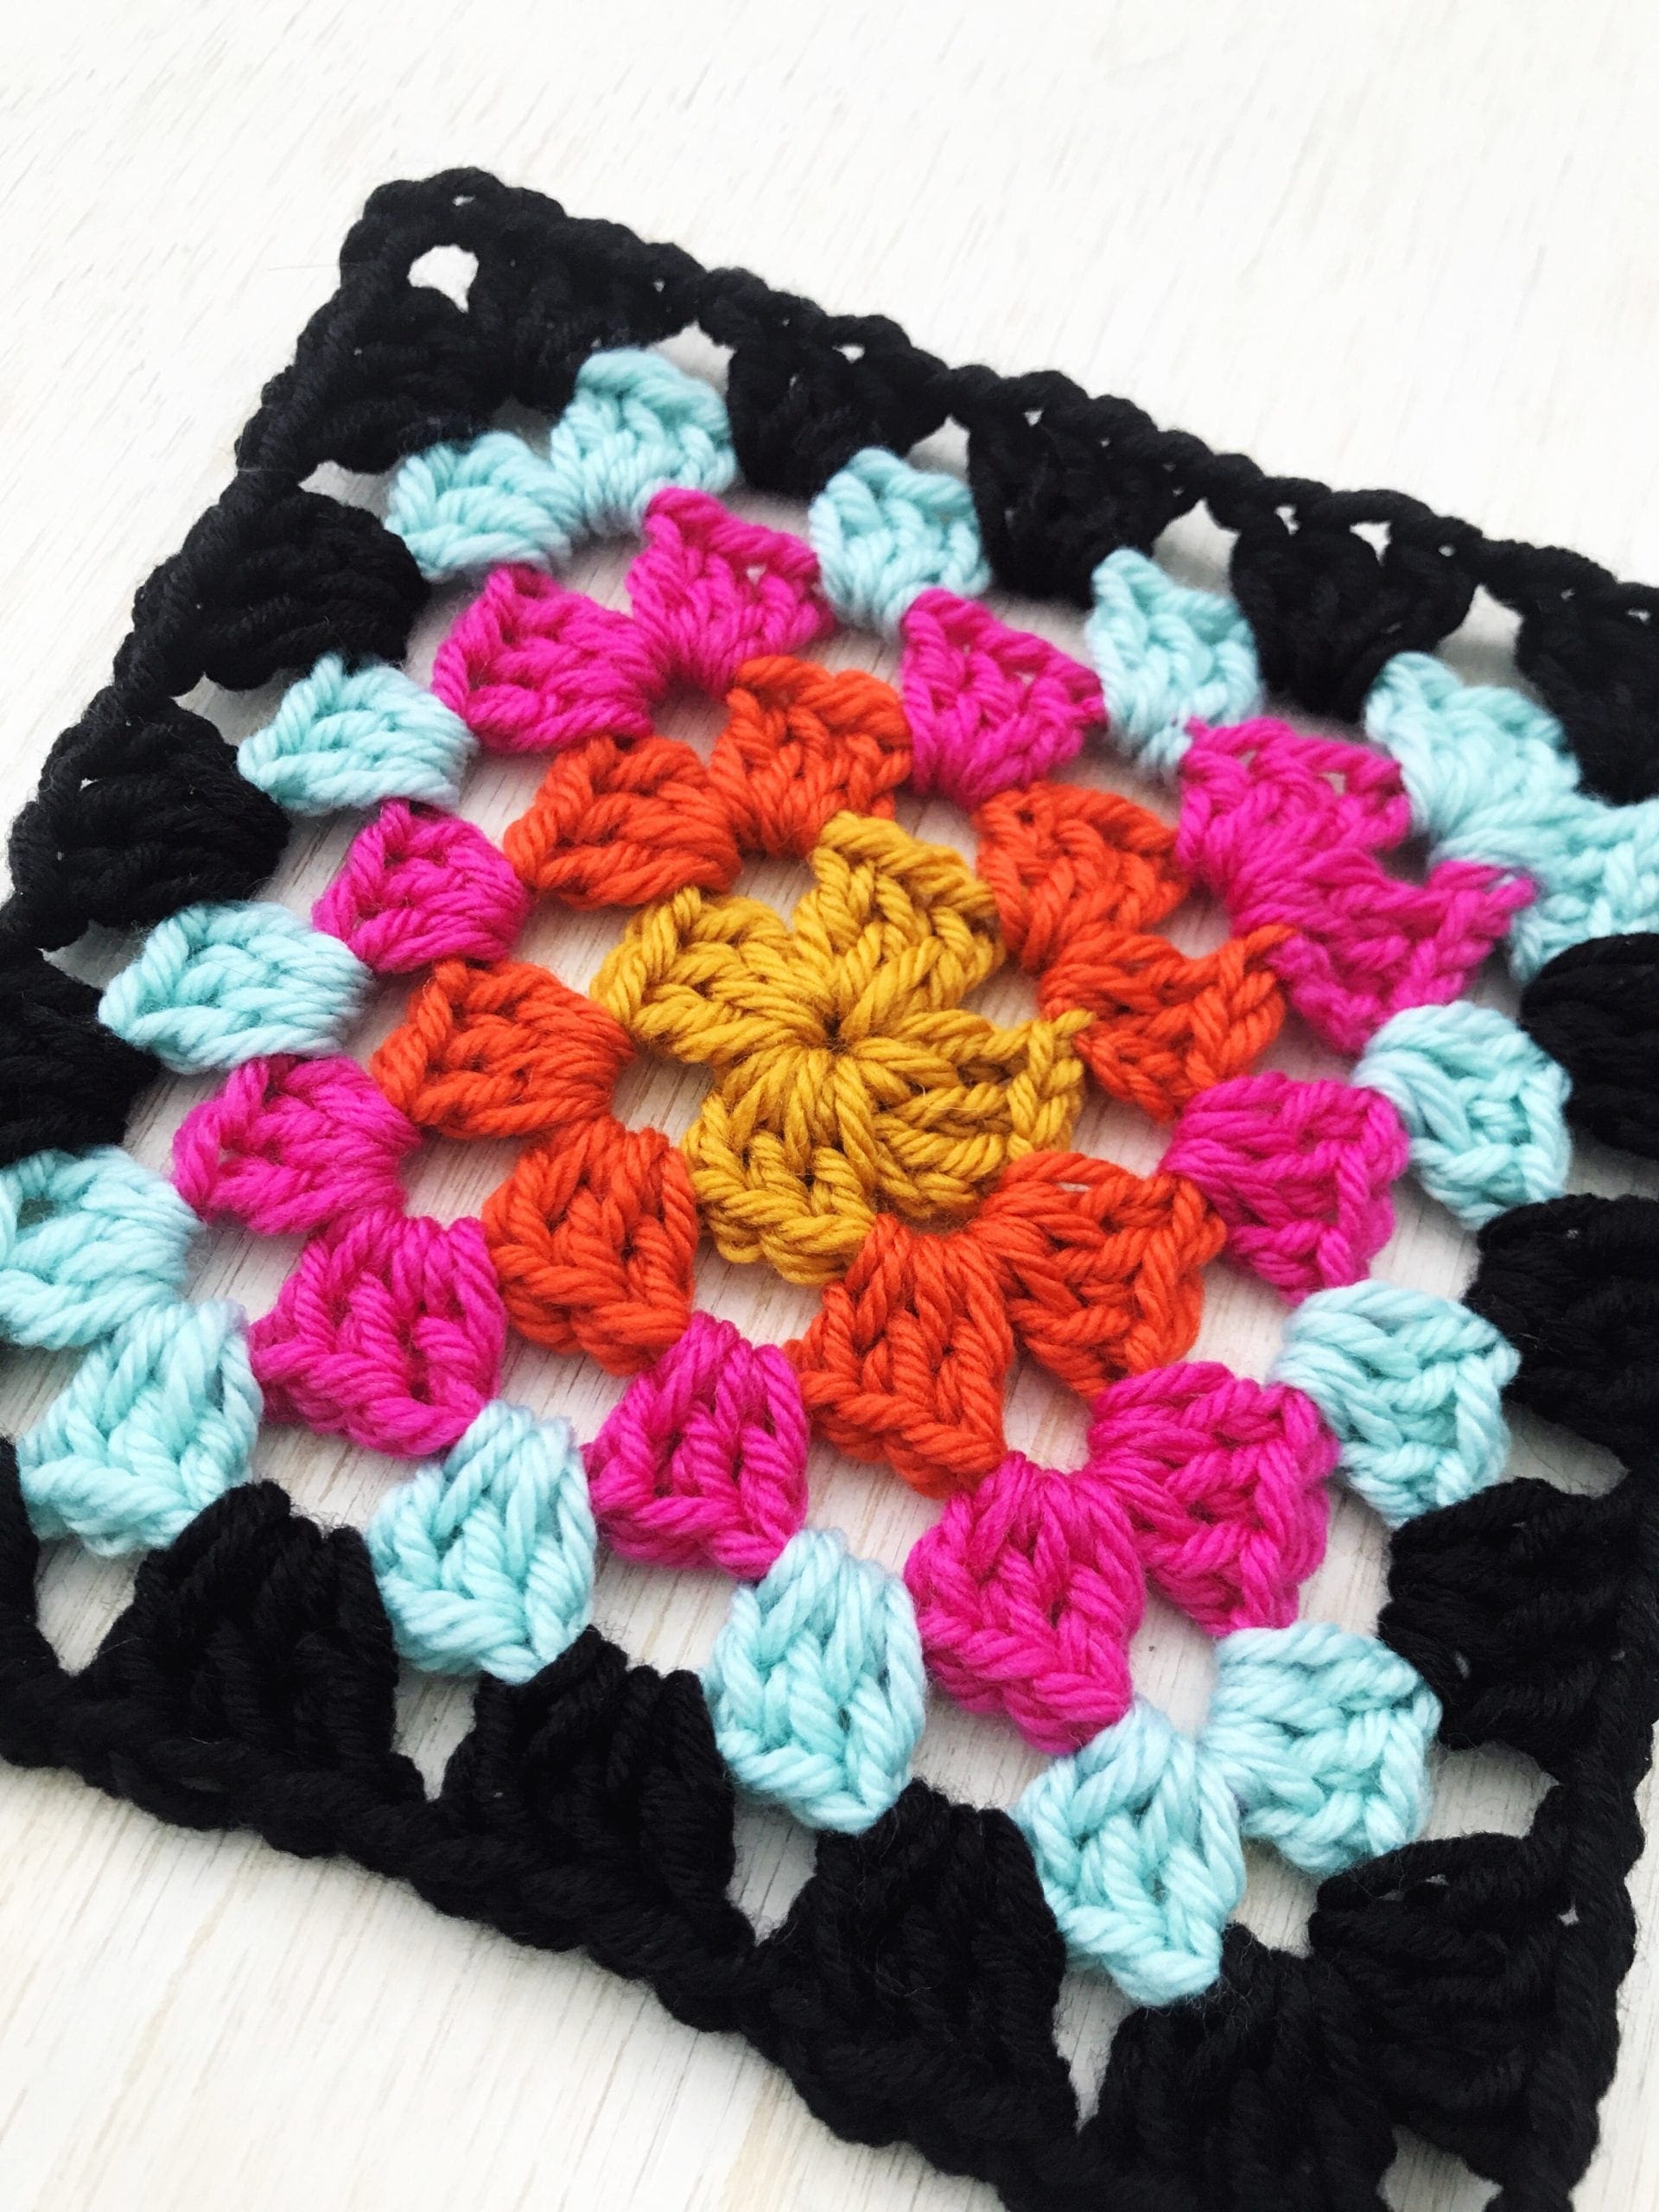 Red Heart All In One Granny Square Yarn - an HONEST Review 